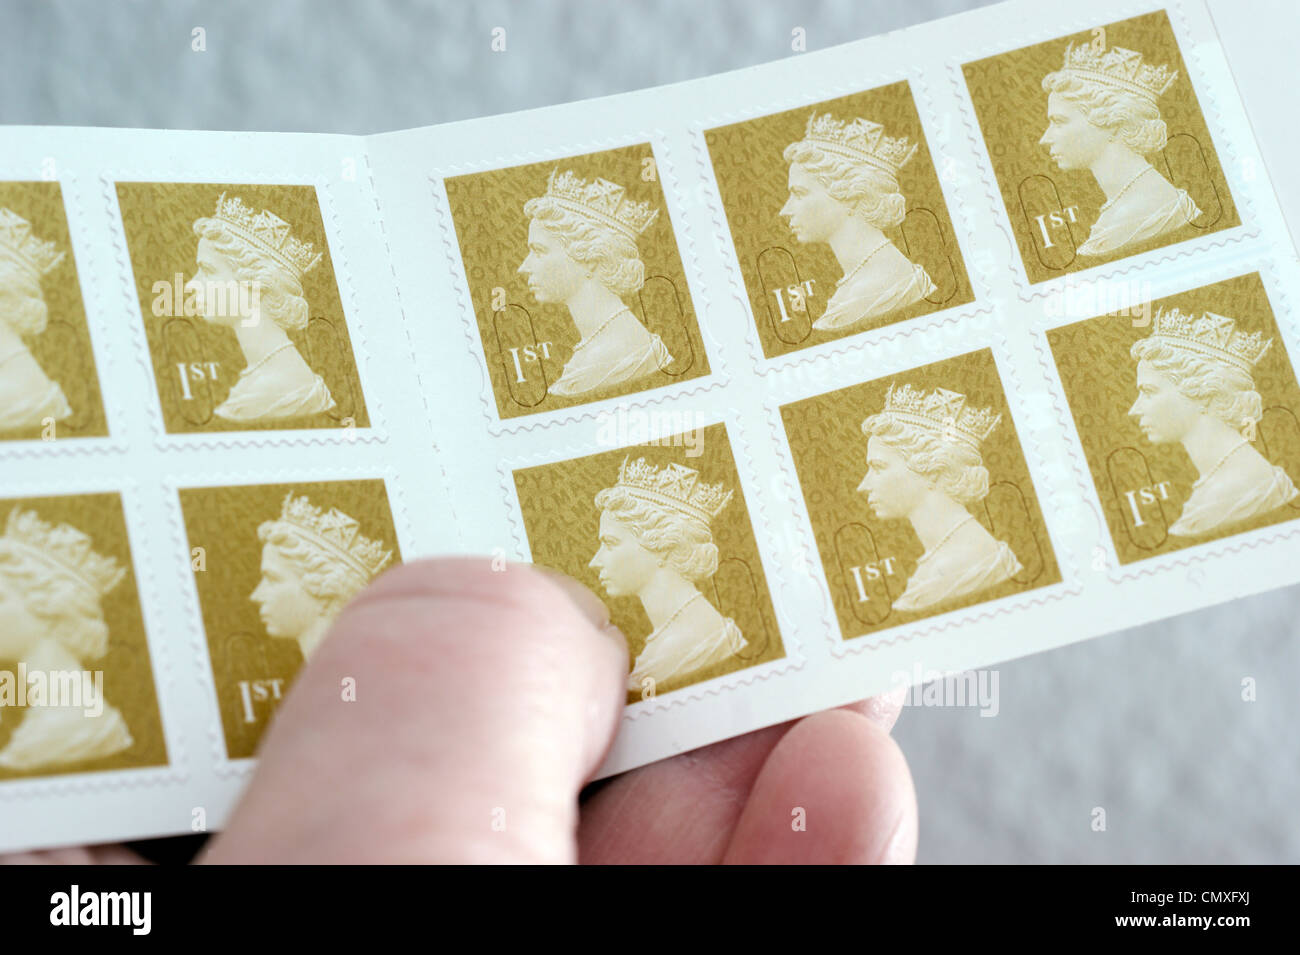 Woman holding a book of 1st (first) class stamps Stock Photo